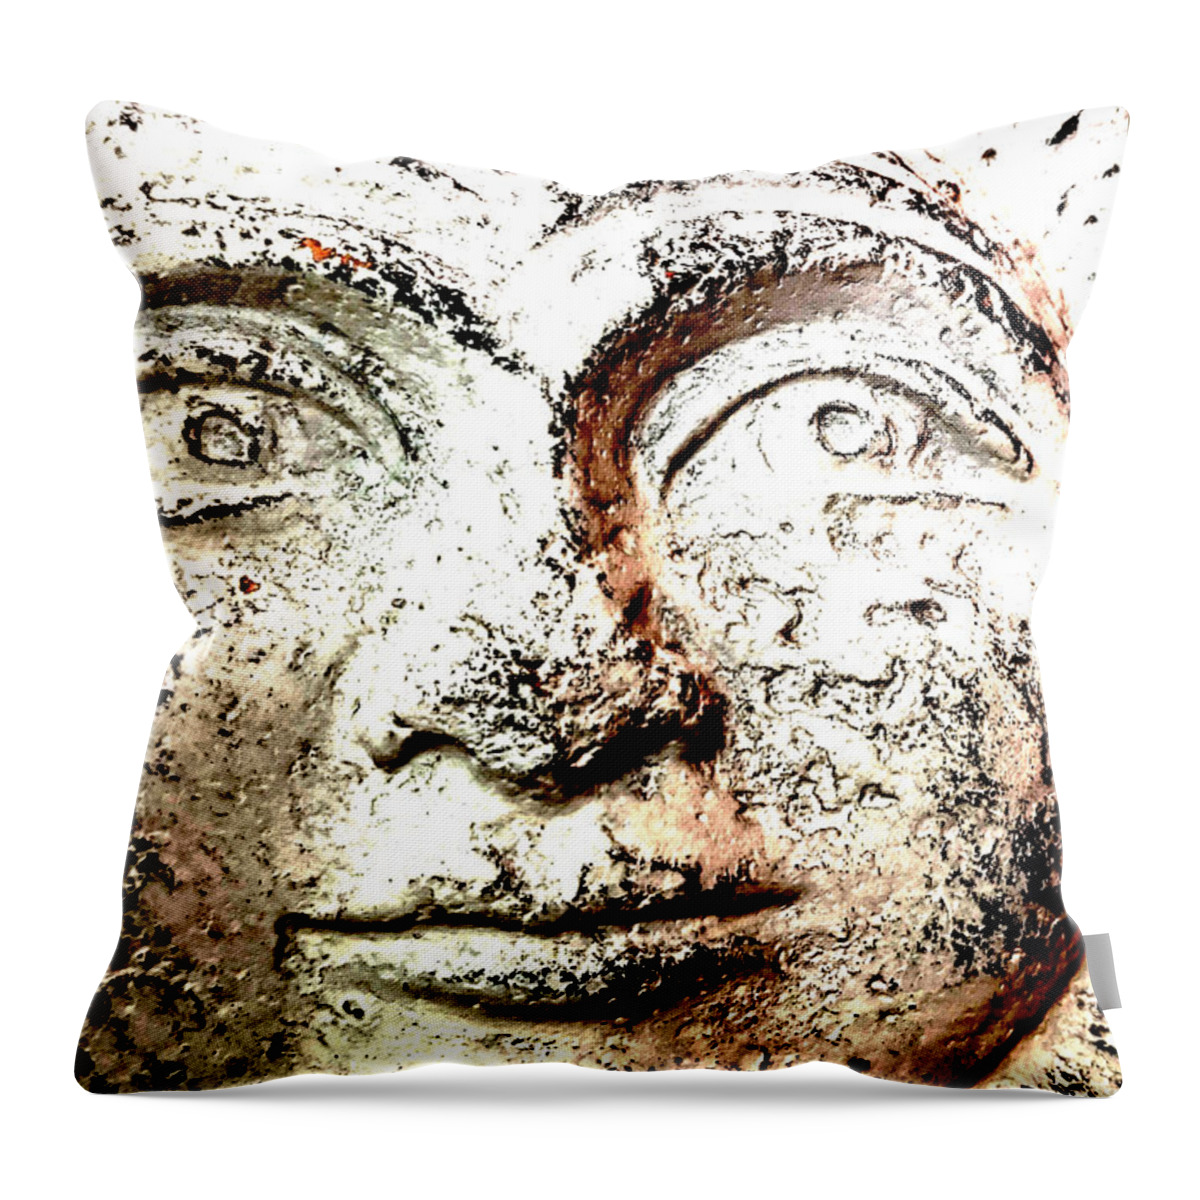 #photo #photos #pic #pics #picture #pictures #snapshot #art #beautiful #instagood #picoftheday #photooftheday #color #all_shots #exposure #composition #focus #capture #moment #jacquelineschreiber #sony #sun #iphone #galaxy Throw Pillow featuring the photograph Sonne -1 by Jacqueline Schreiber